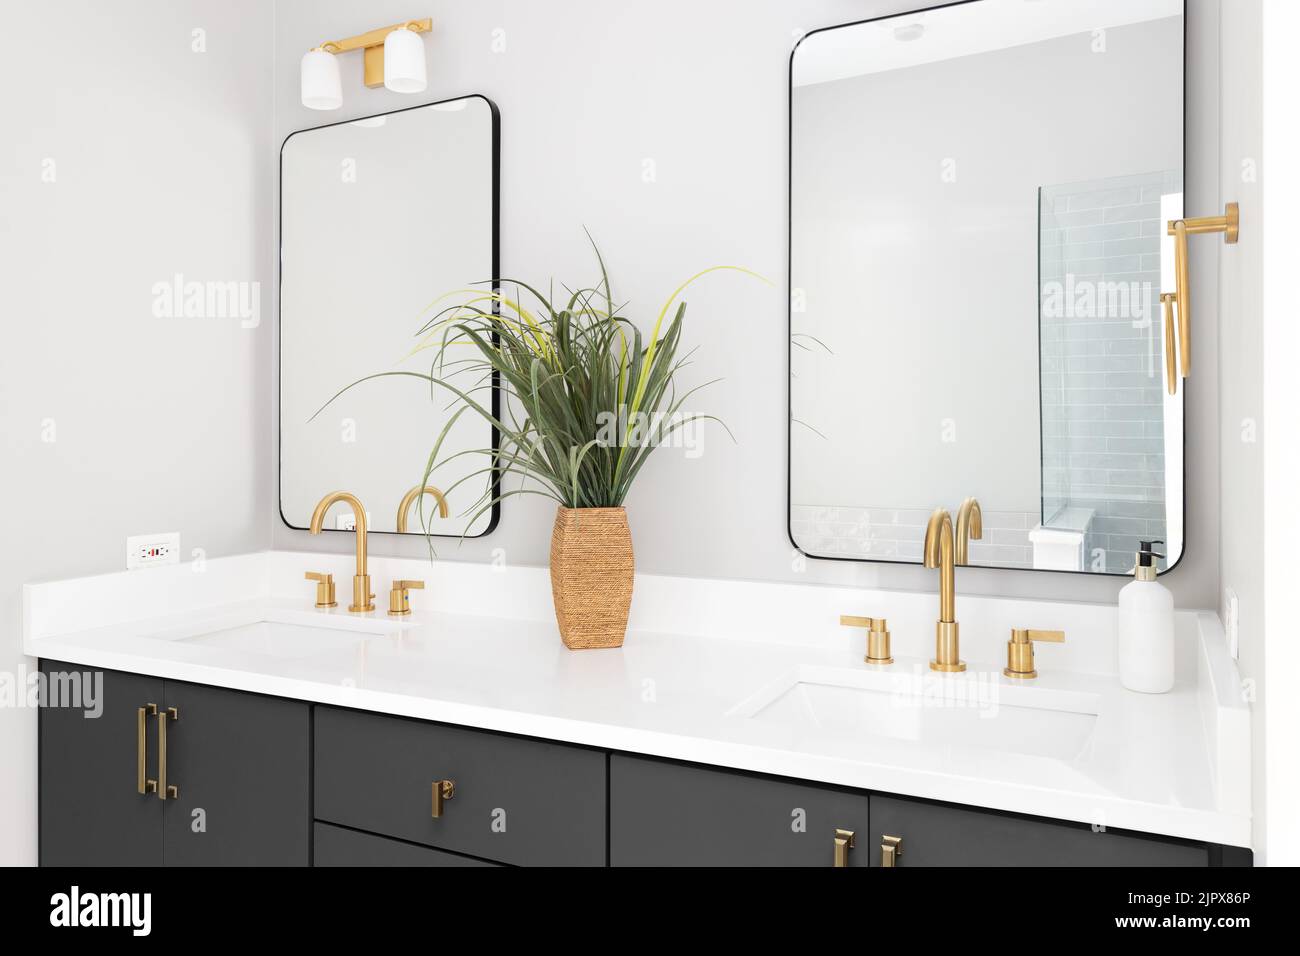 Bathroom a grey vanity, gold lights and faucets, and white marble countertop. Stock Photo